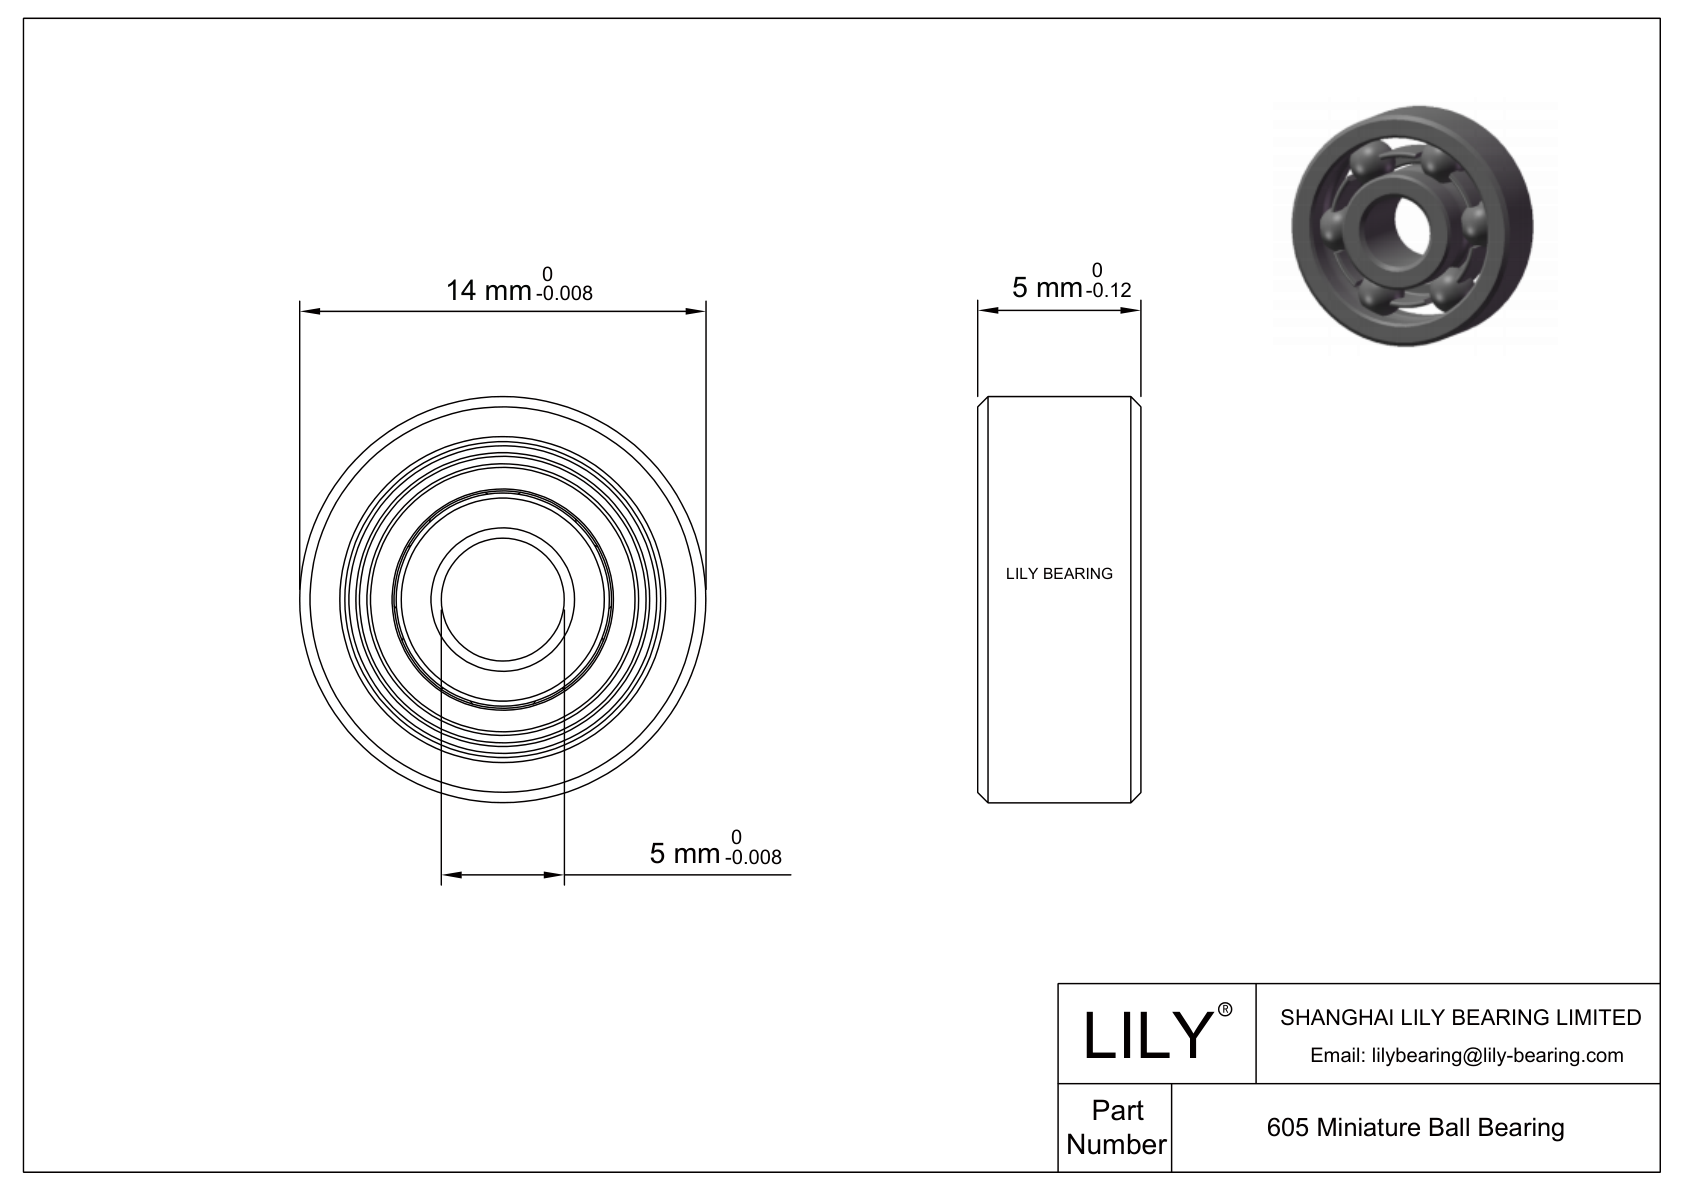 LILY-BS60519-7 POM Coated Bearing cad drawing